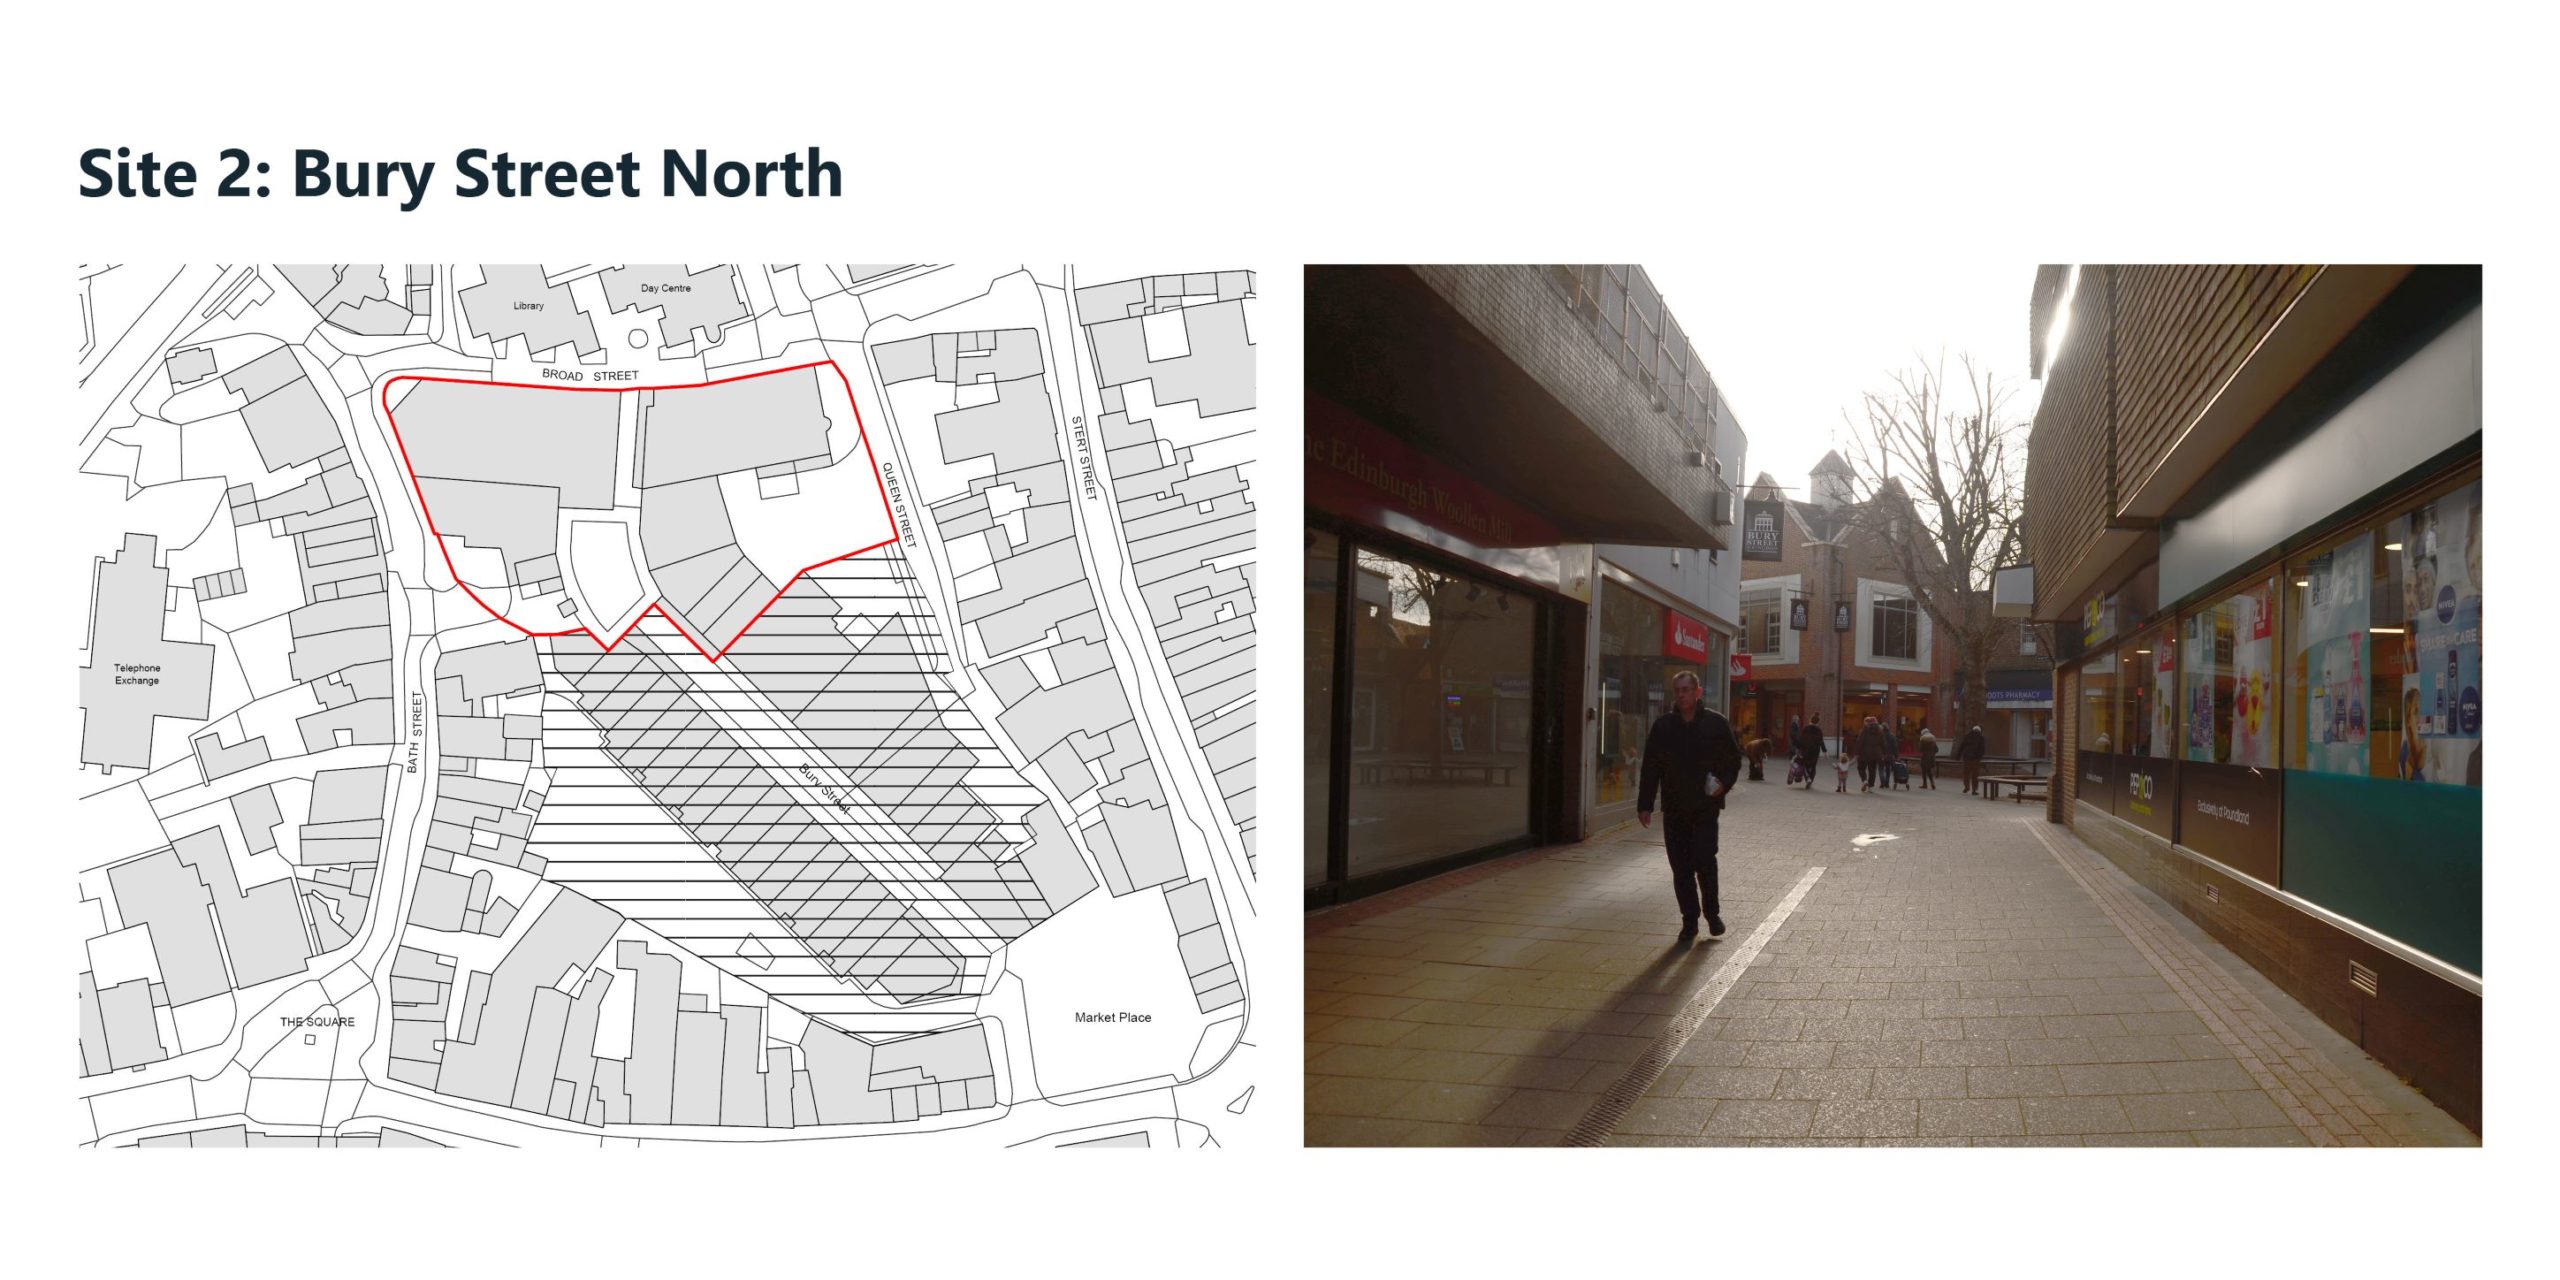 (left) Location plan of Bury Street North showing the area considered for redevelopment. (right) Photograph of Bury Street North showing the passageway between Broad Street and the public space at the northern end of Bury Street.